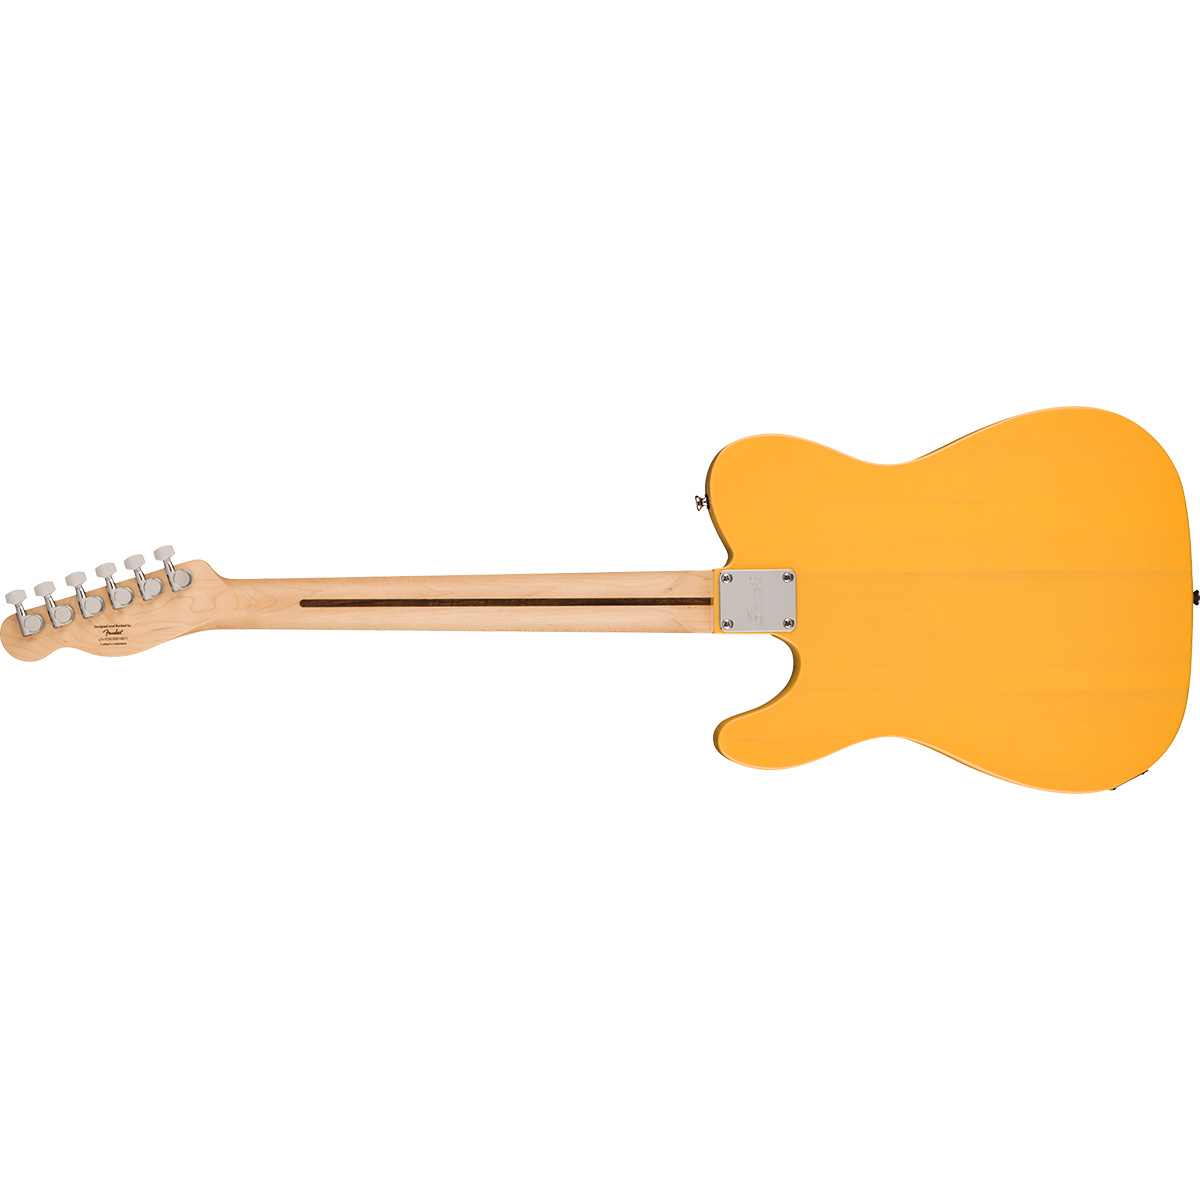 Squier by Fender SONIC TELECASTER Butterscotch Blonde エレキギター 